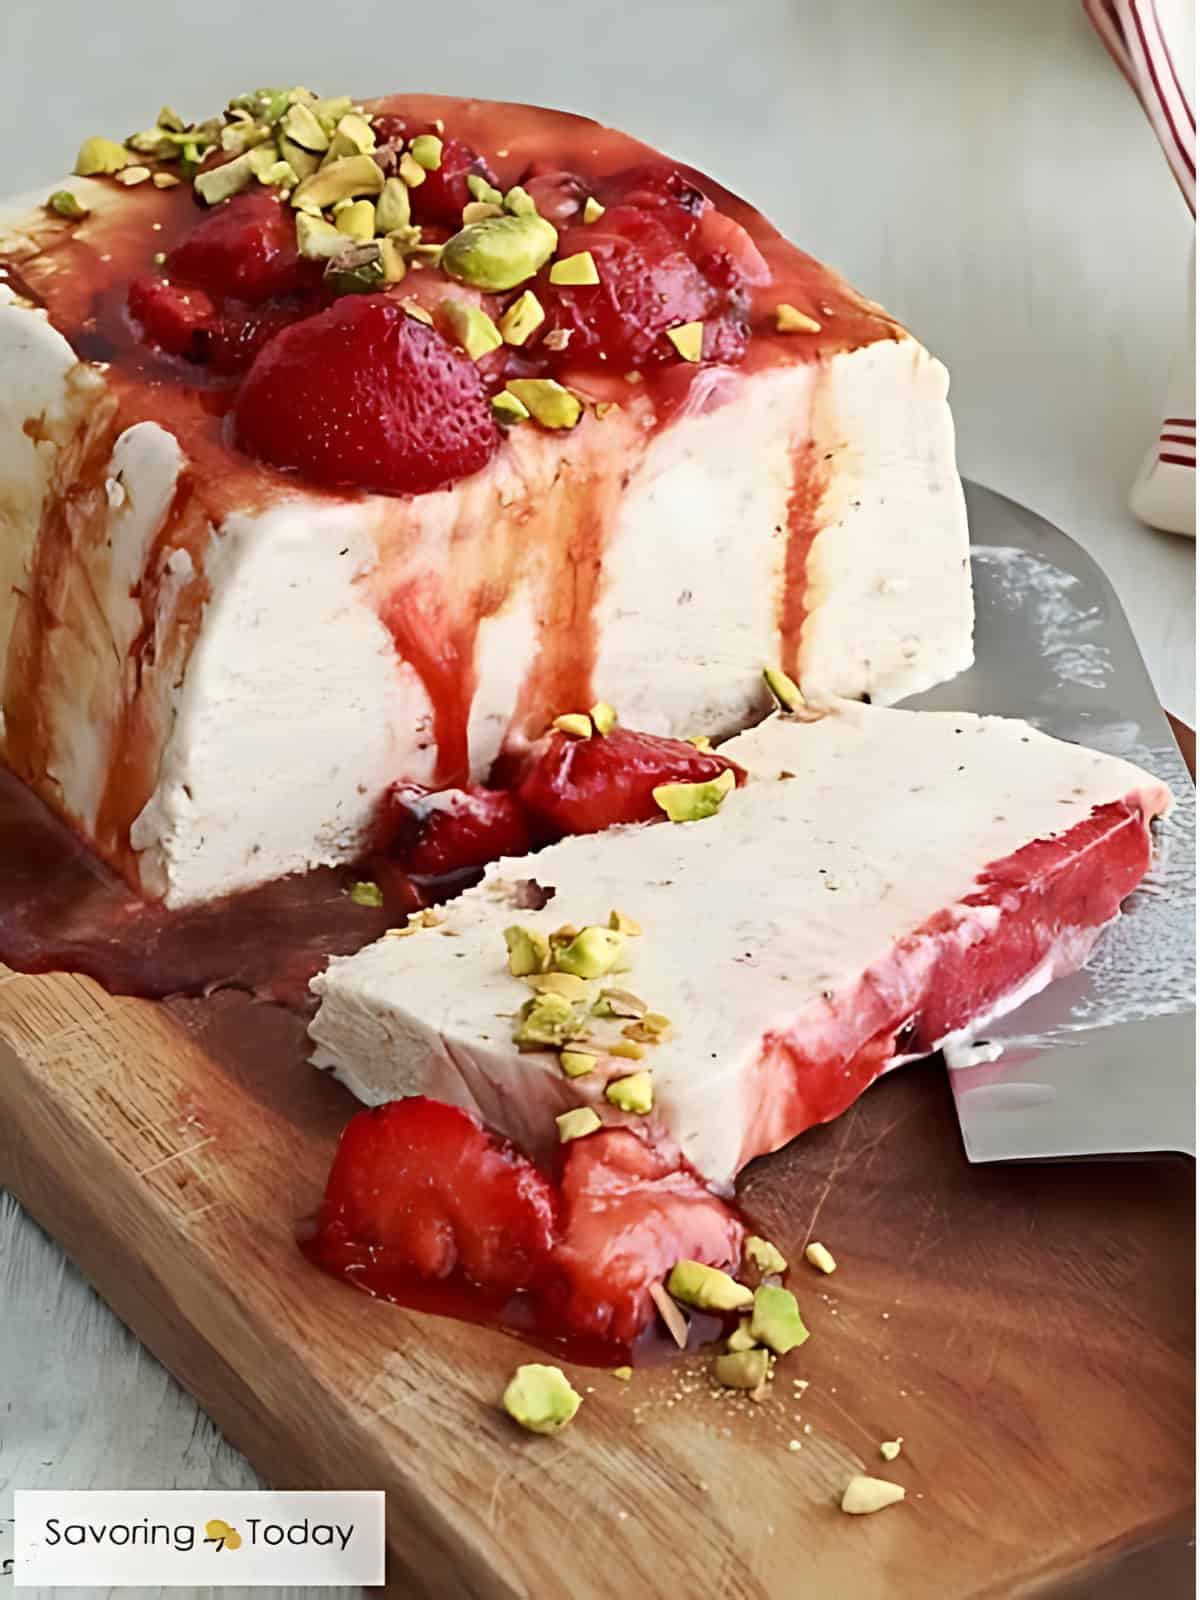 Strawberry Semifreddo with Pistachios Balsamic on a chopping board.